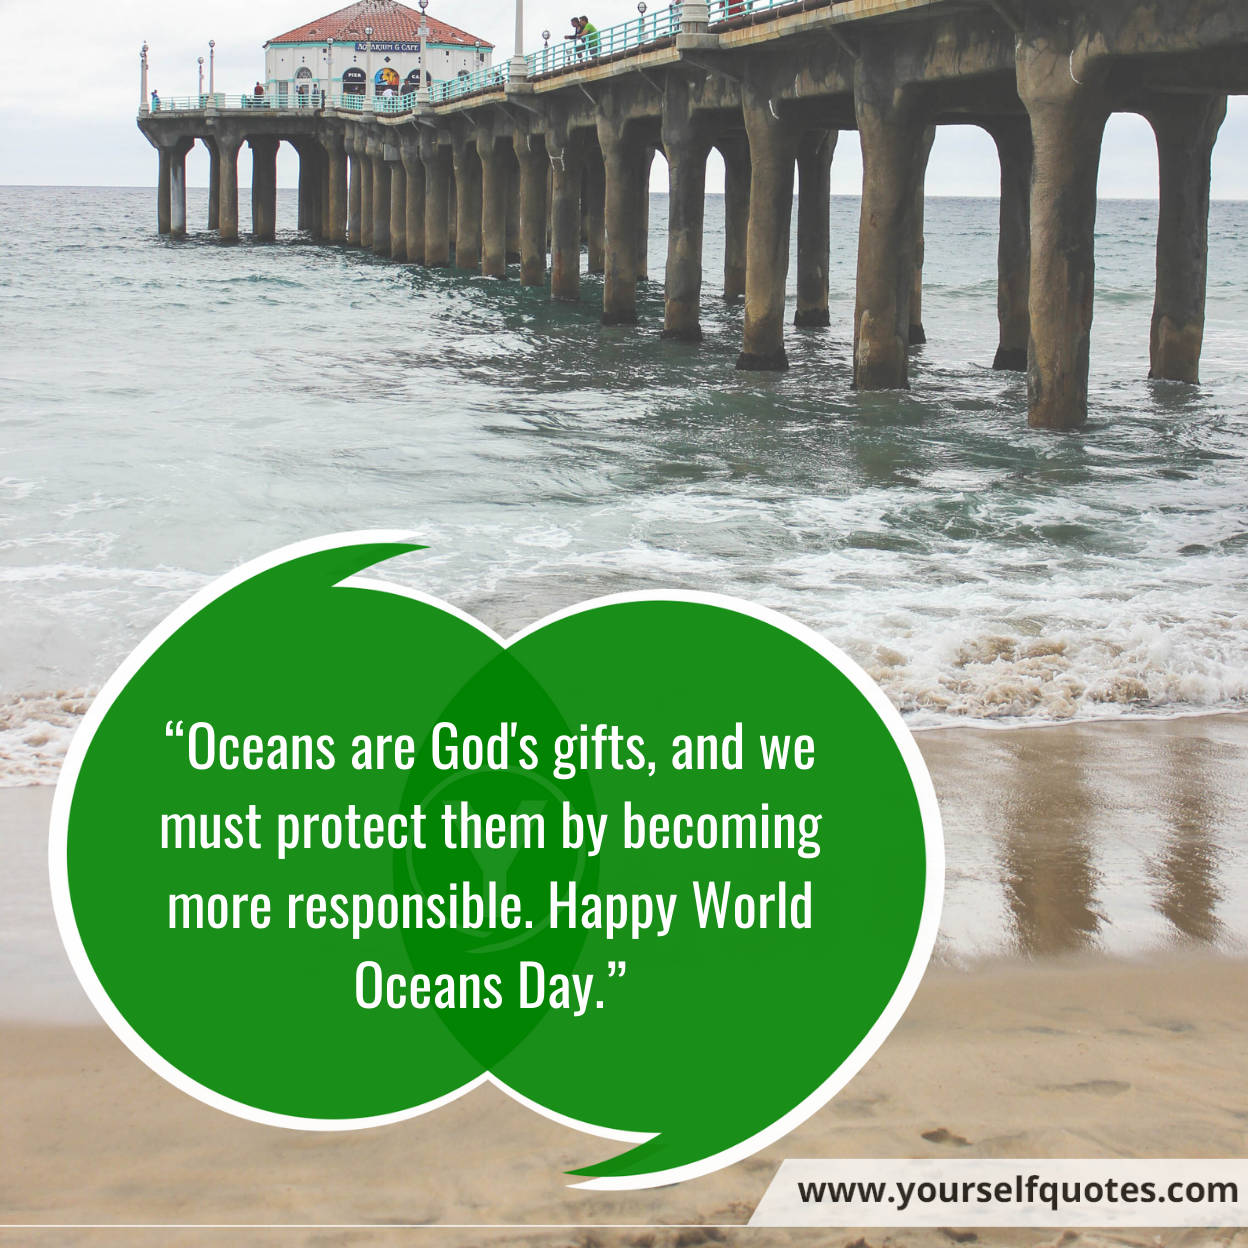 World Oceans Day Wishes Images